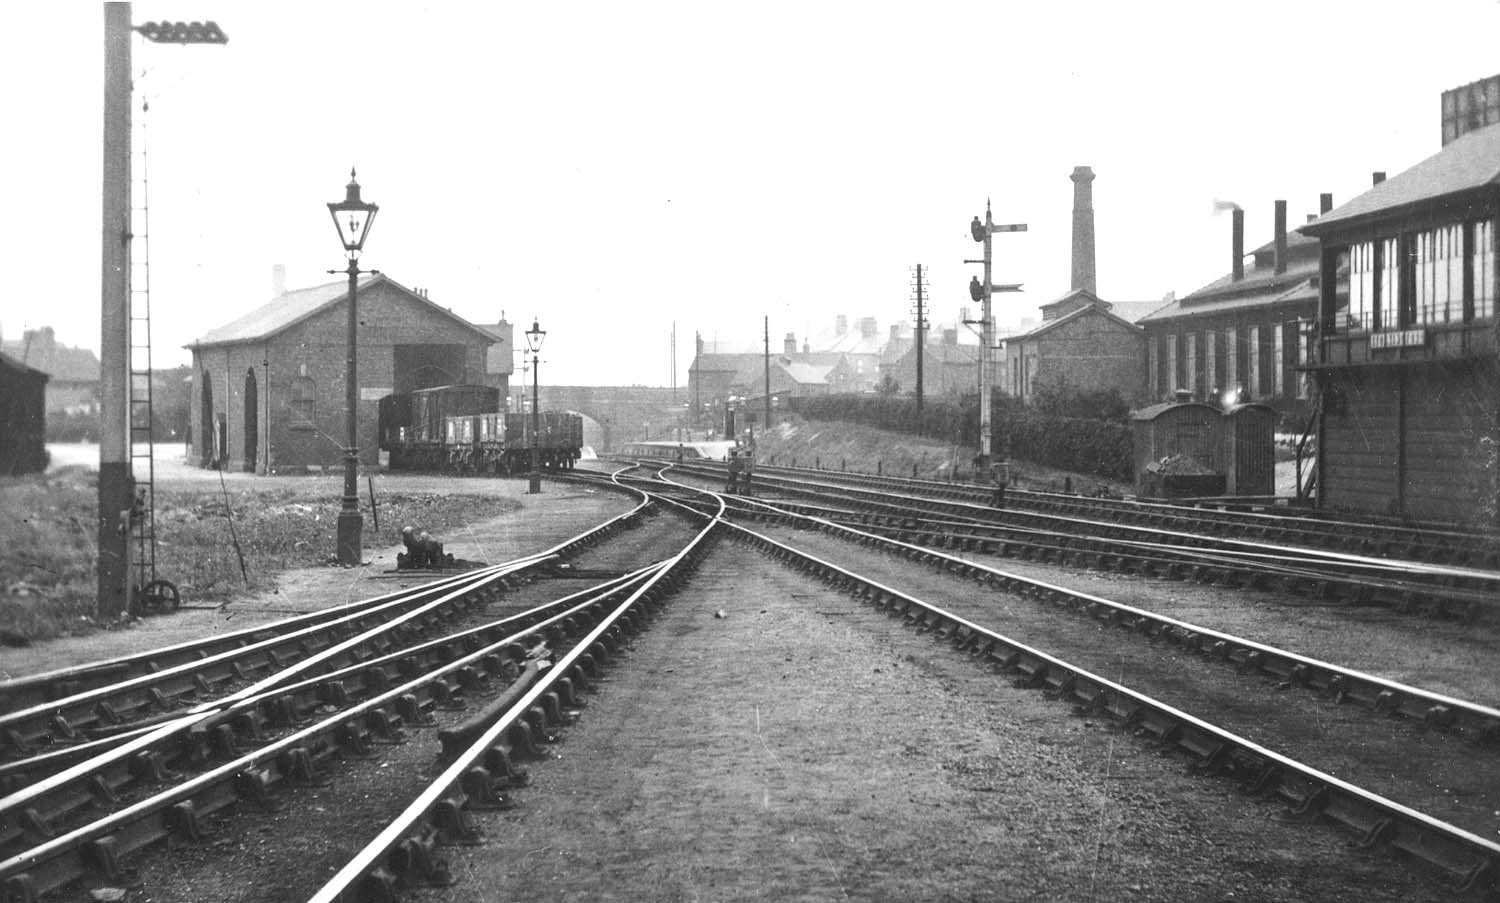 Looking towards Nuneaton from Stockingford branch line's sidings with the locomotive shed on the right behind the signal box